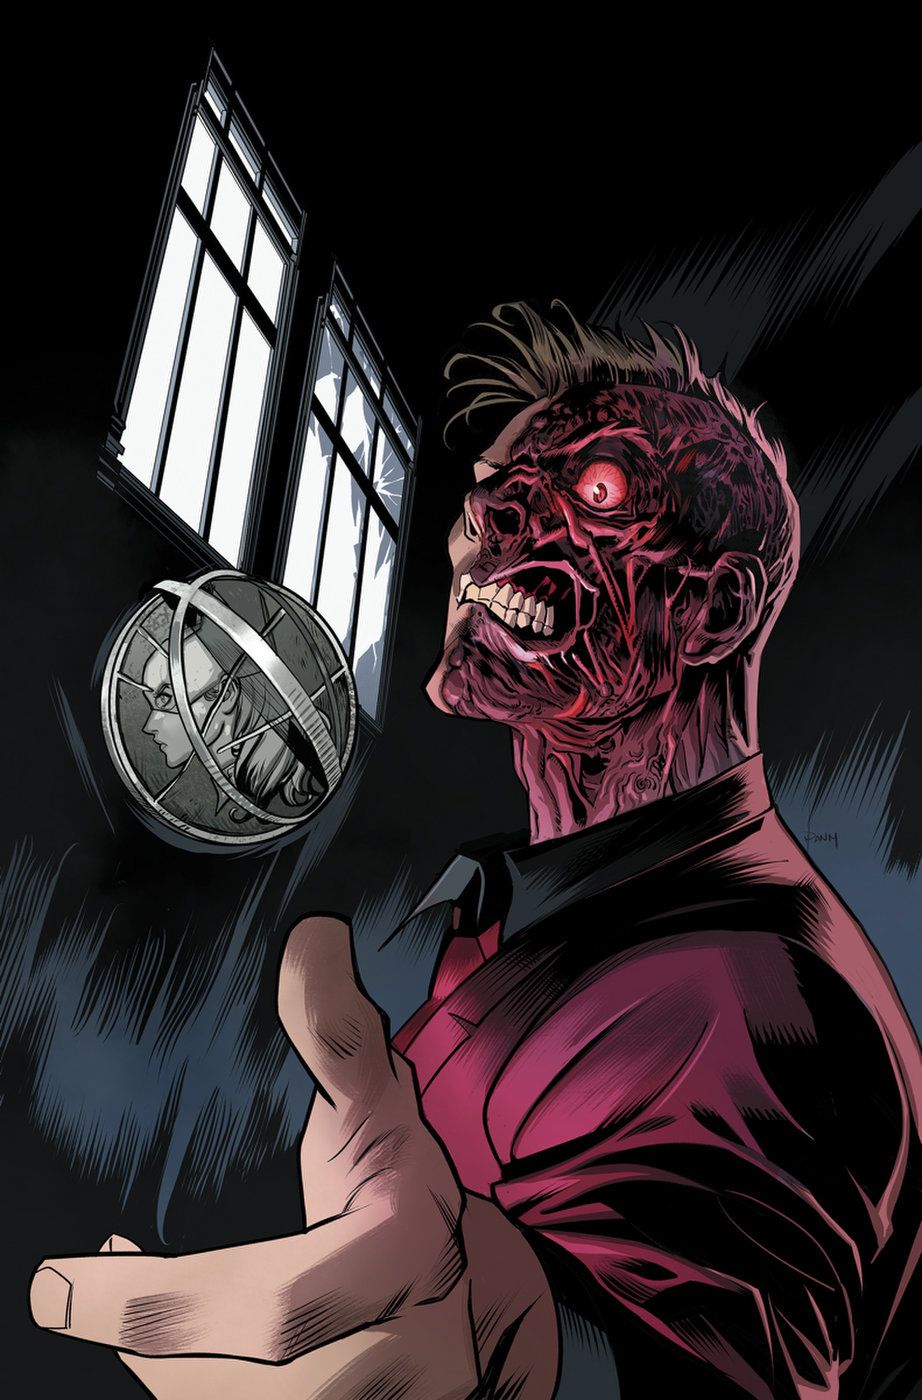 https://static.wikia.nocookie.net/fantendo/images/3/36/Two-Face_%28DC_Comics%29.jpg/revision/latest?cb=20210720205912